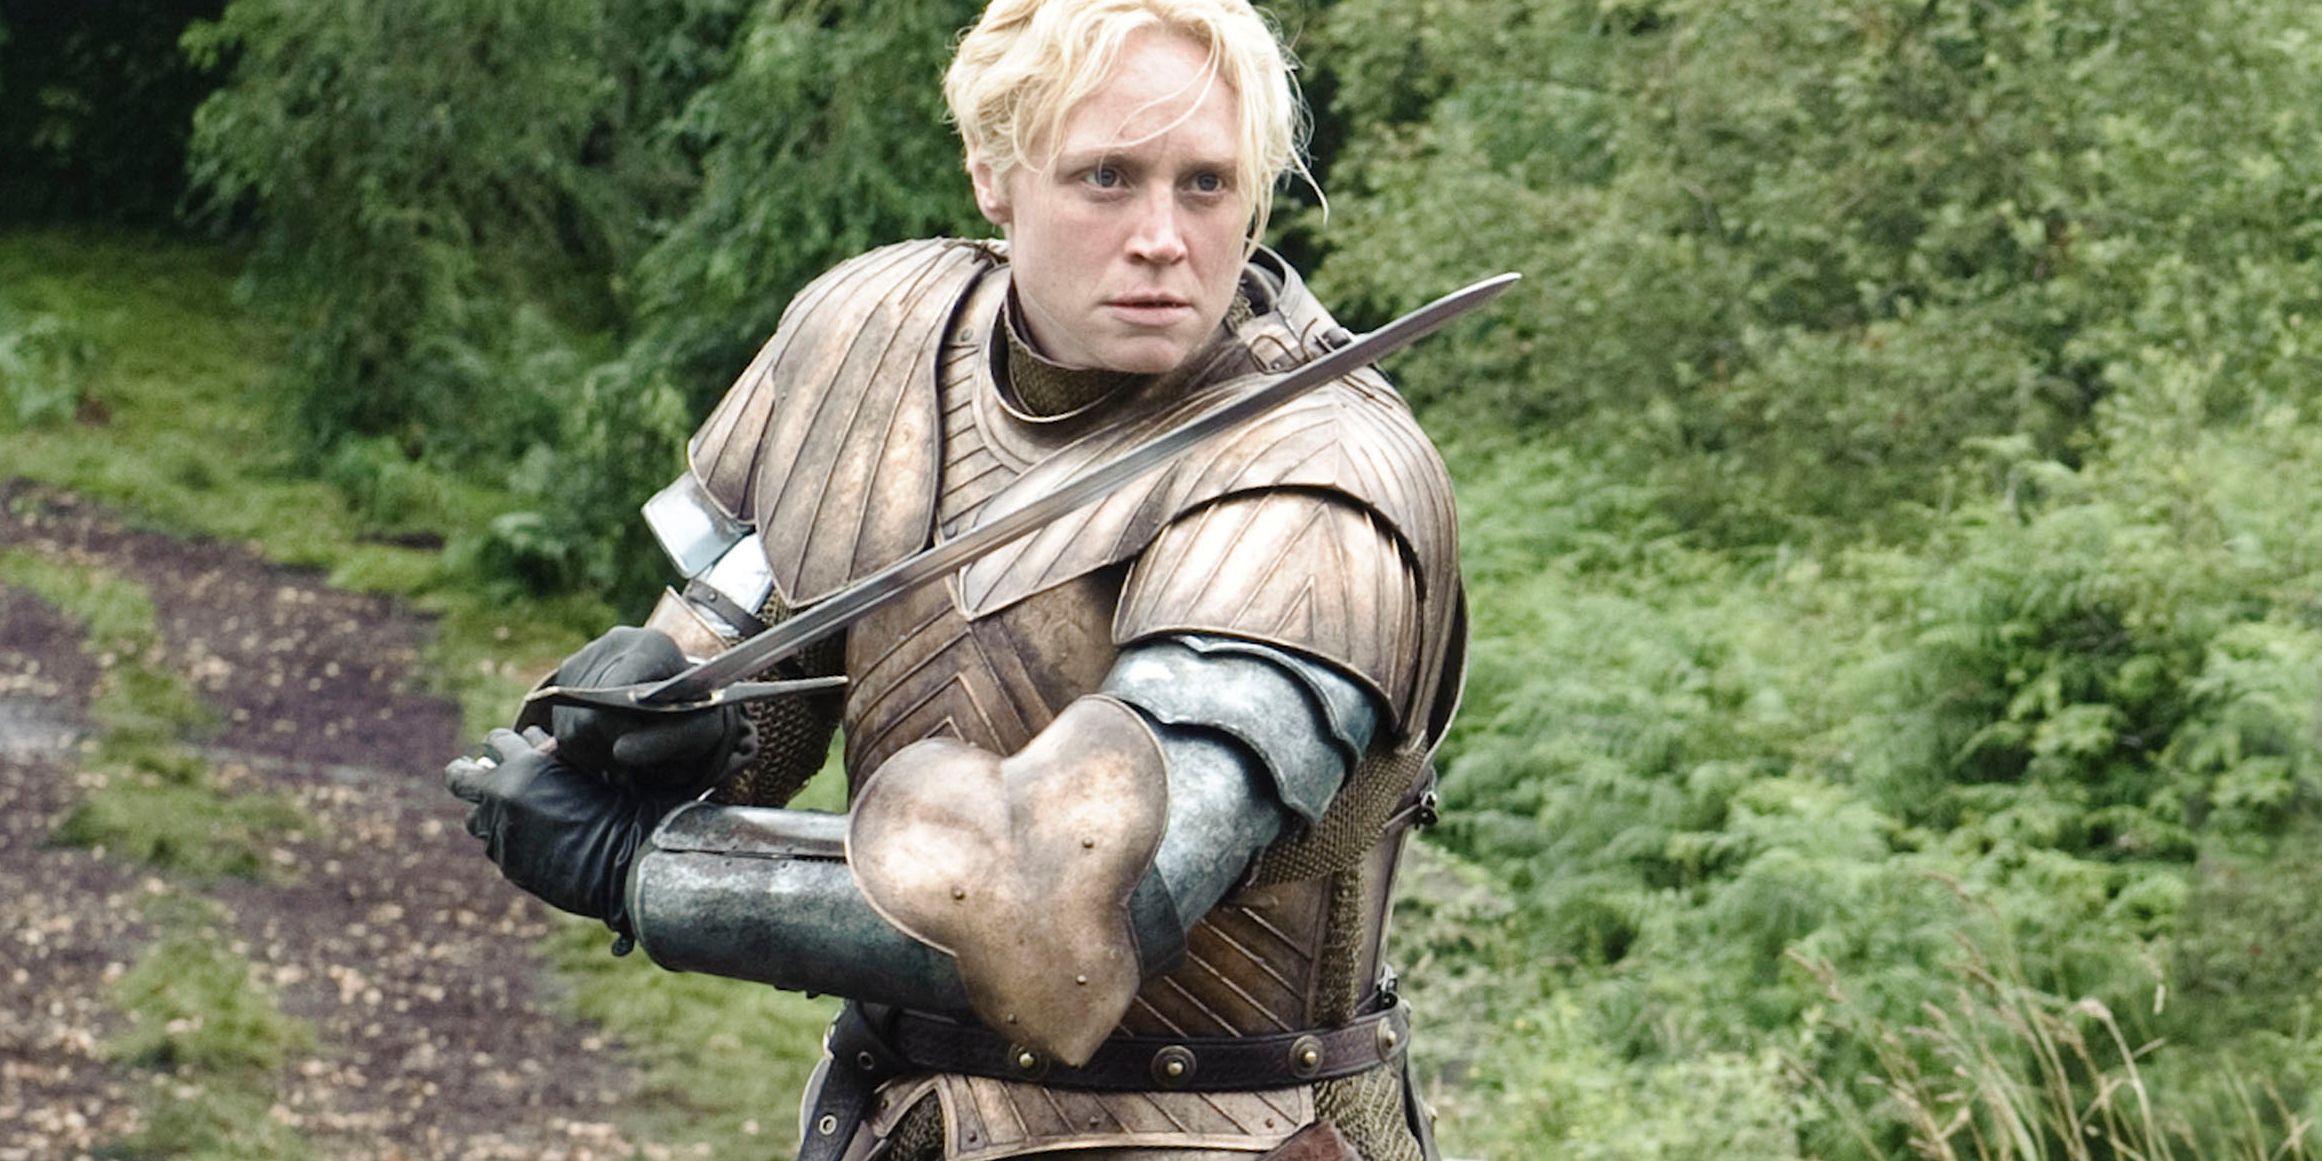 Gwendoline Christie as Brienne Of Tarth in Game of Thrones wielding a sword and wearing armour